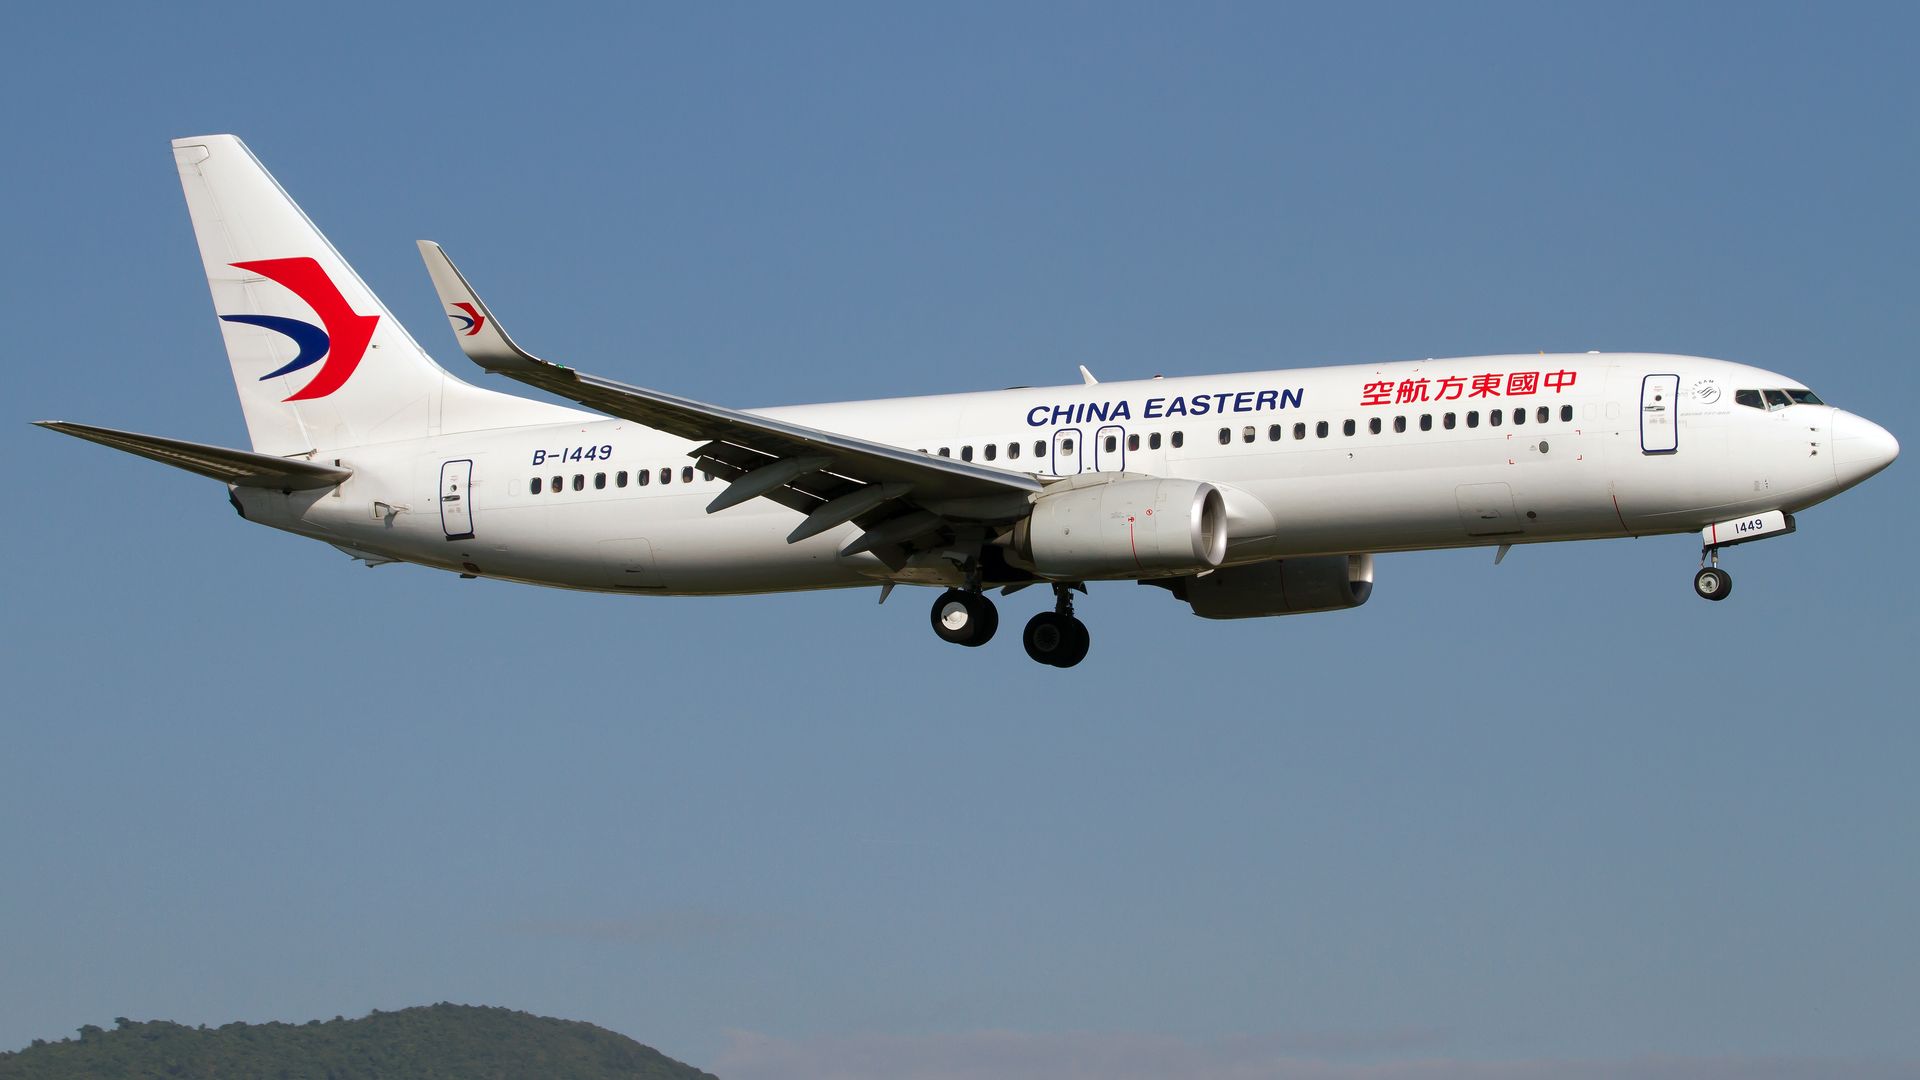 A China Eastern Airlines Boeing 737-800 landing at an airport in Hainan, China, in December 2018.